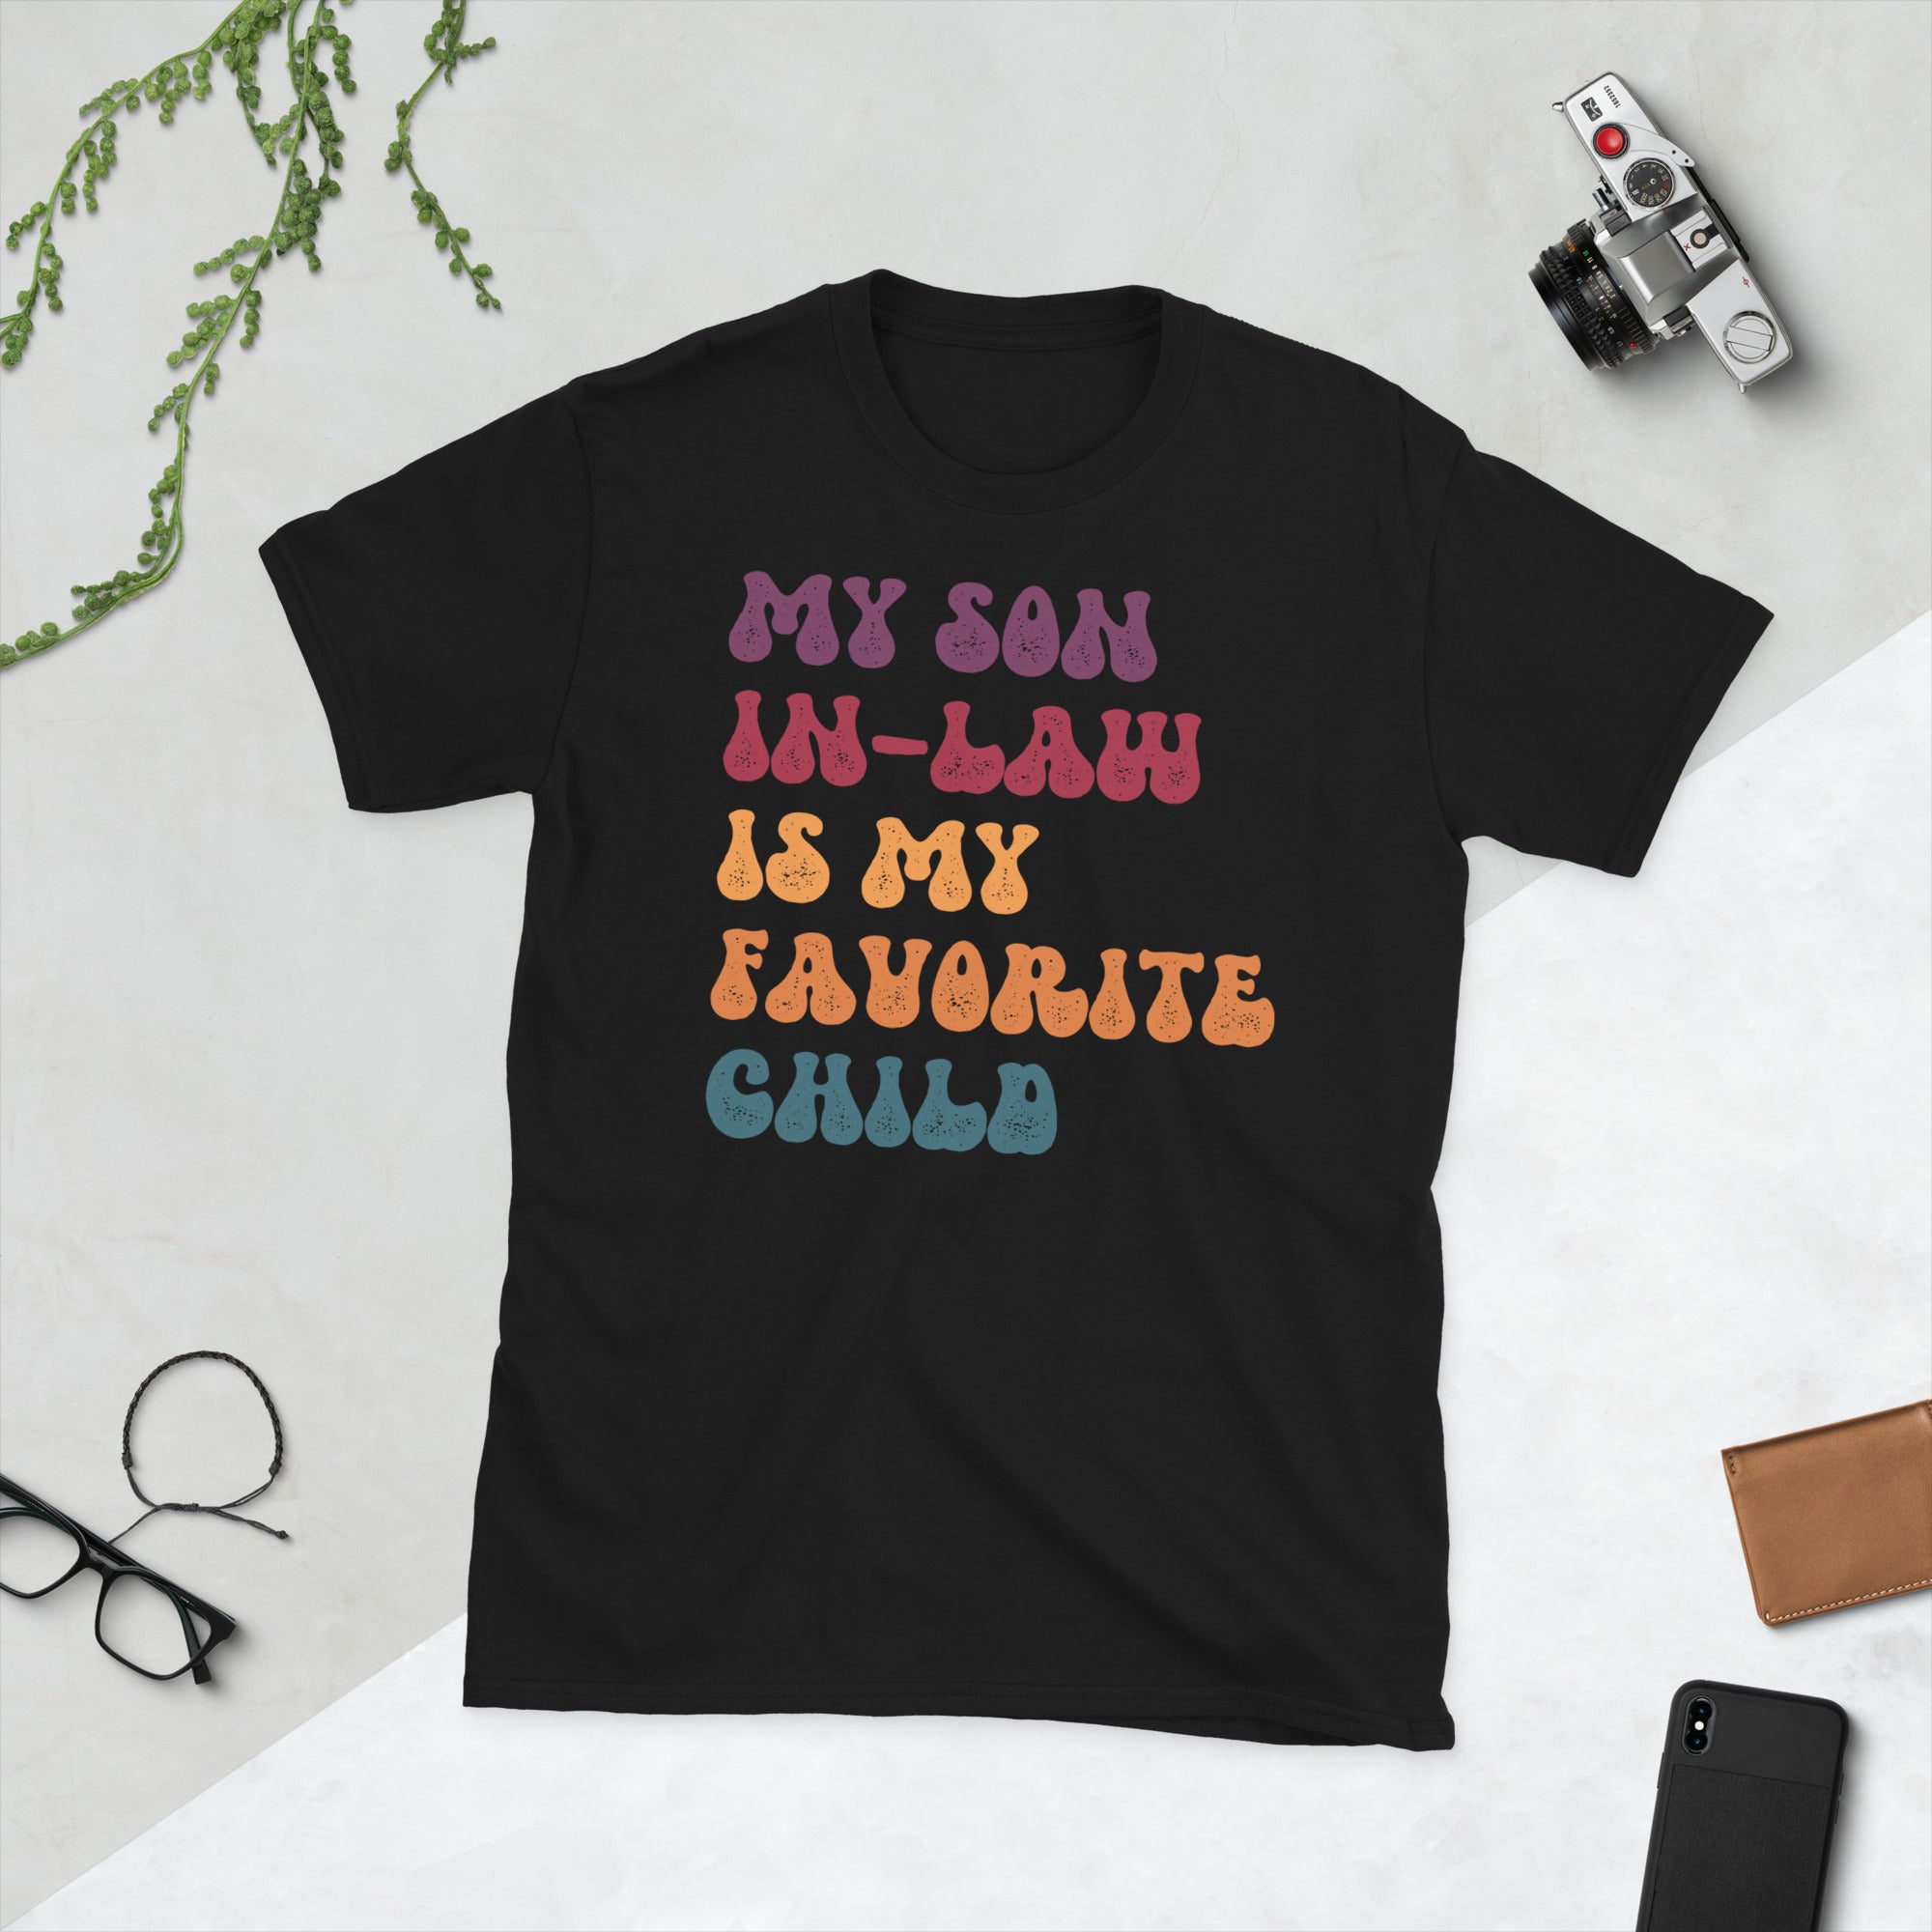 My Son In Law Is My Favorite Child Funny Mother In Law Groovy Shirt, Funny Family T-shirt, Funny Son Tee, Gift For Mother In Law